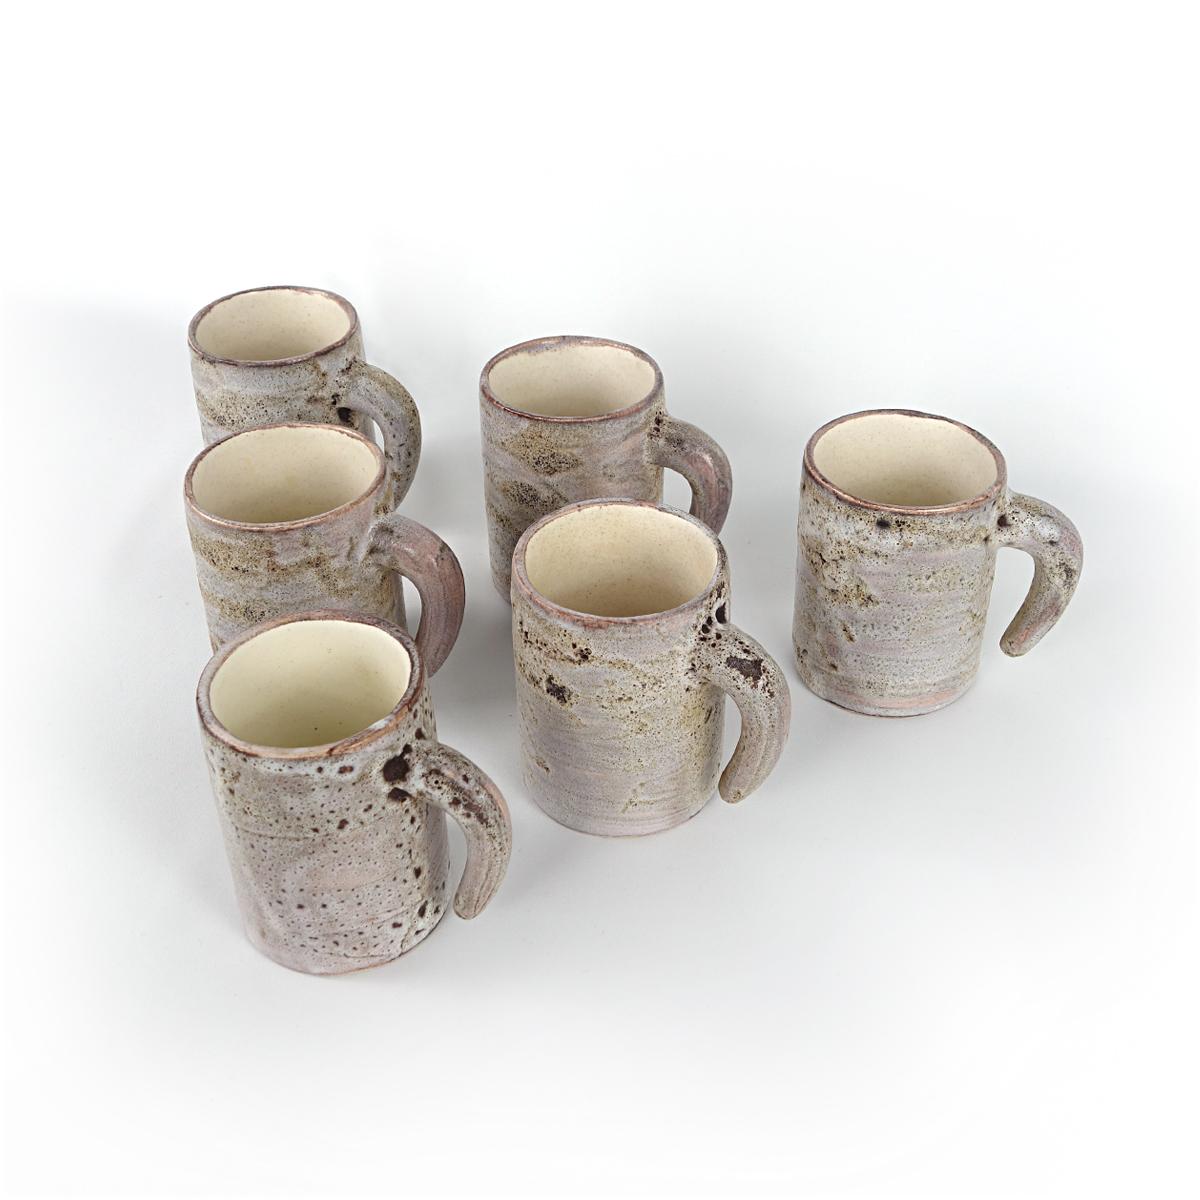 Very rare set of 6 ceramic mugs by Francis and Josette Bonaudi for Vallauris of France. Hand made and also glazed by hand, making each mug individual.